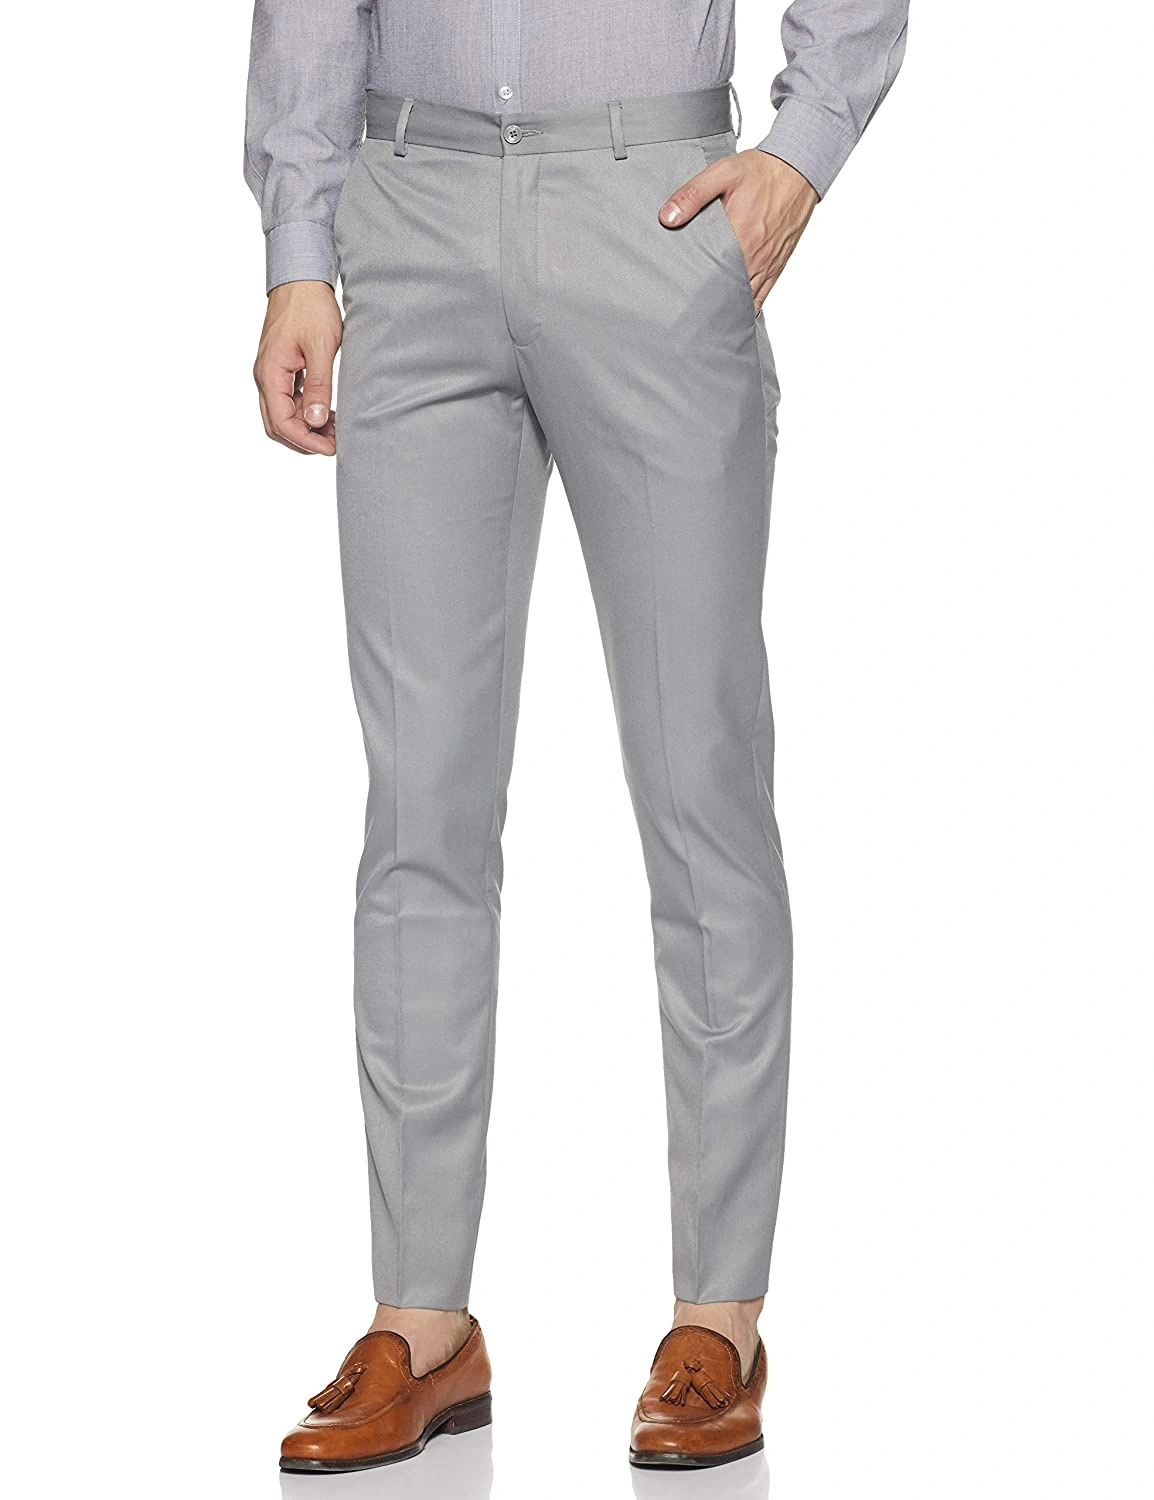 Buy Peter England Elite Grey Slim Fit Trousers for Mens Online  Tata CLiQ